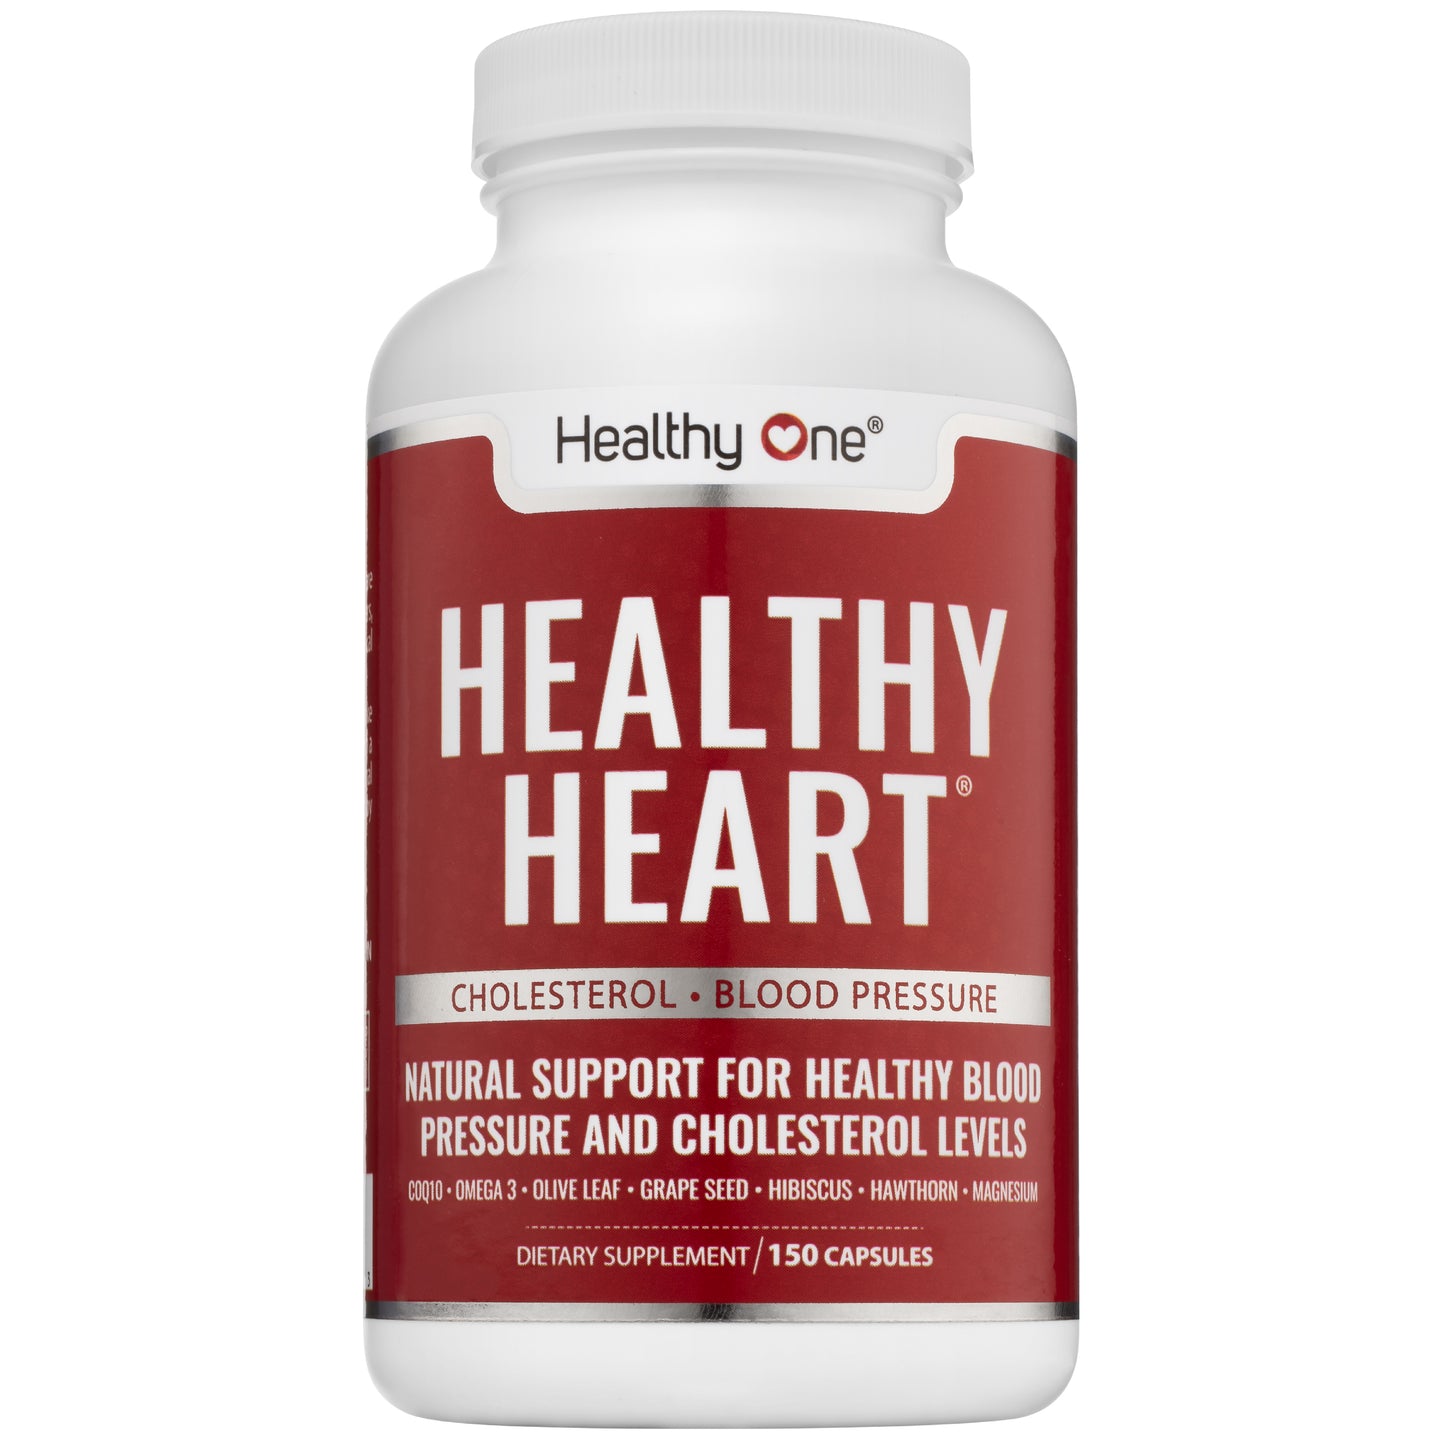 Healthy Heart - Blood Pressure, Cholesterol and Cardiovascular Supplement